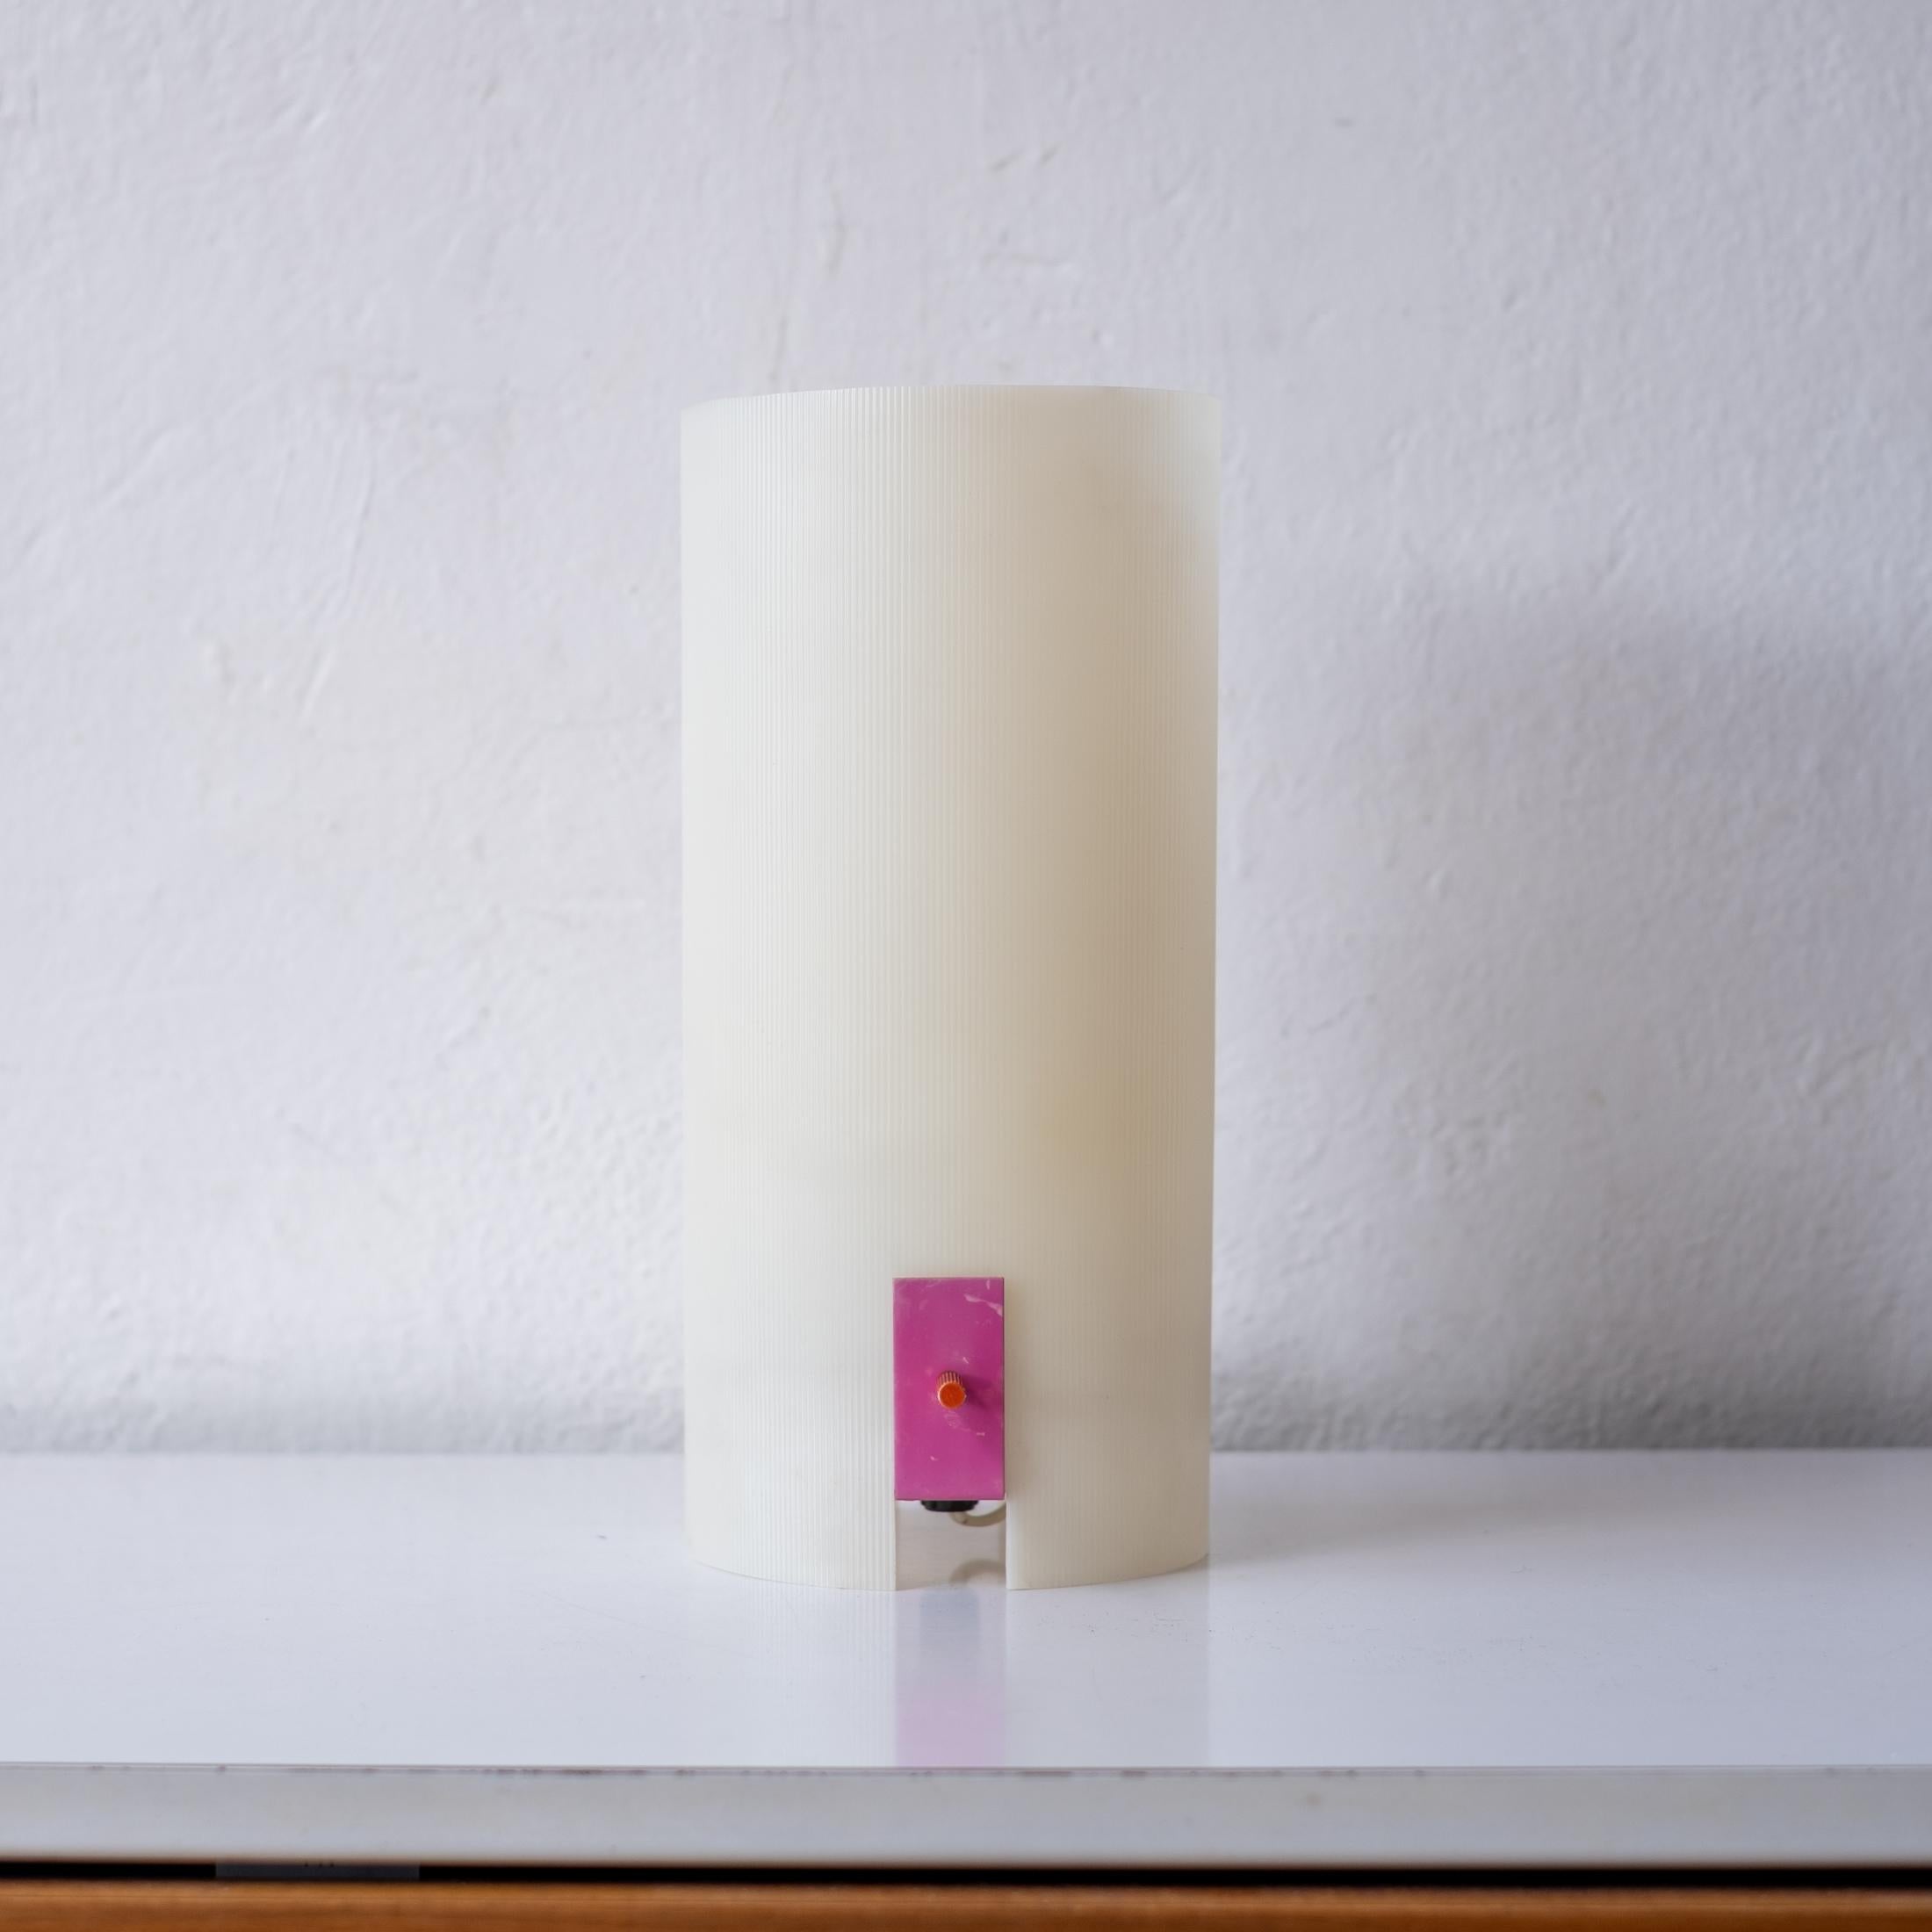 Minimalist lamp by Bill Curry for his company, Design Line. Designed and manufactured in El Segundo, CA in the 1960s. Hard extruded ribbed plastic with enameled pink metal frame and orange metal switch. 

Bill Curry's work was selected for